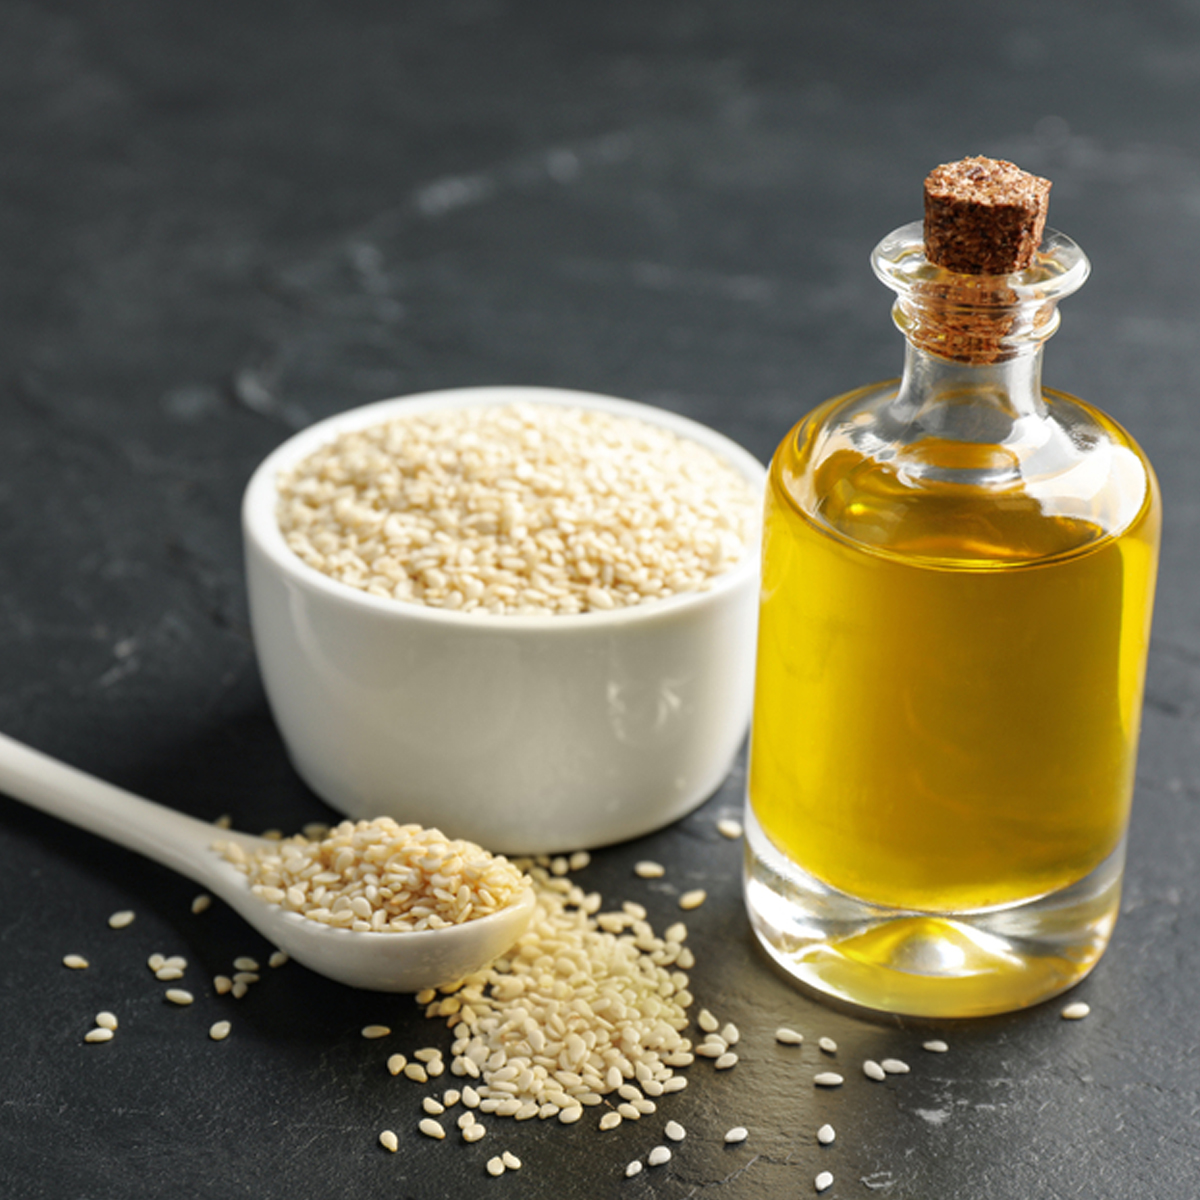 A small bottle of sesame oil next to a bowl of sesame seeds and a spoonful of sesame seeds